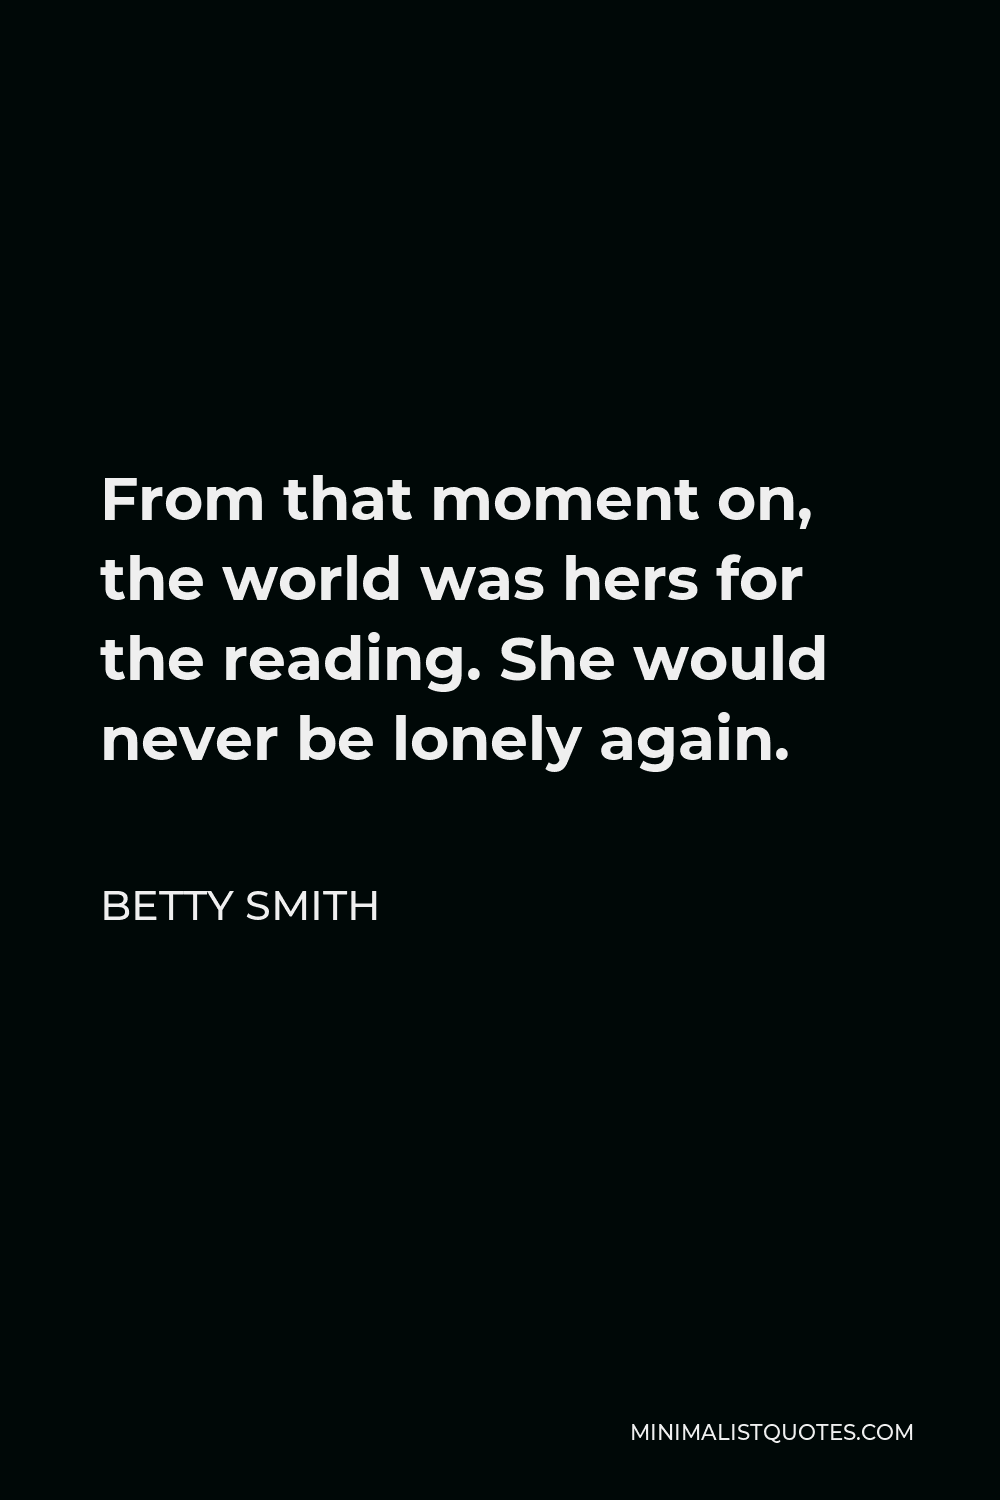 Betty Smith Quote - From that moment on, the world was hers for the reading. She would never be lonely again.